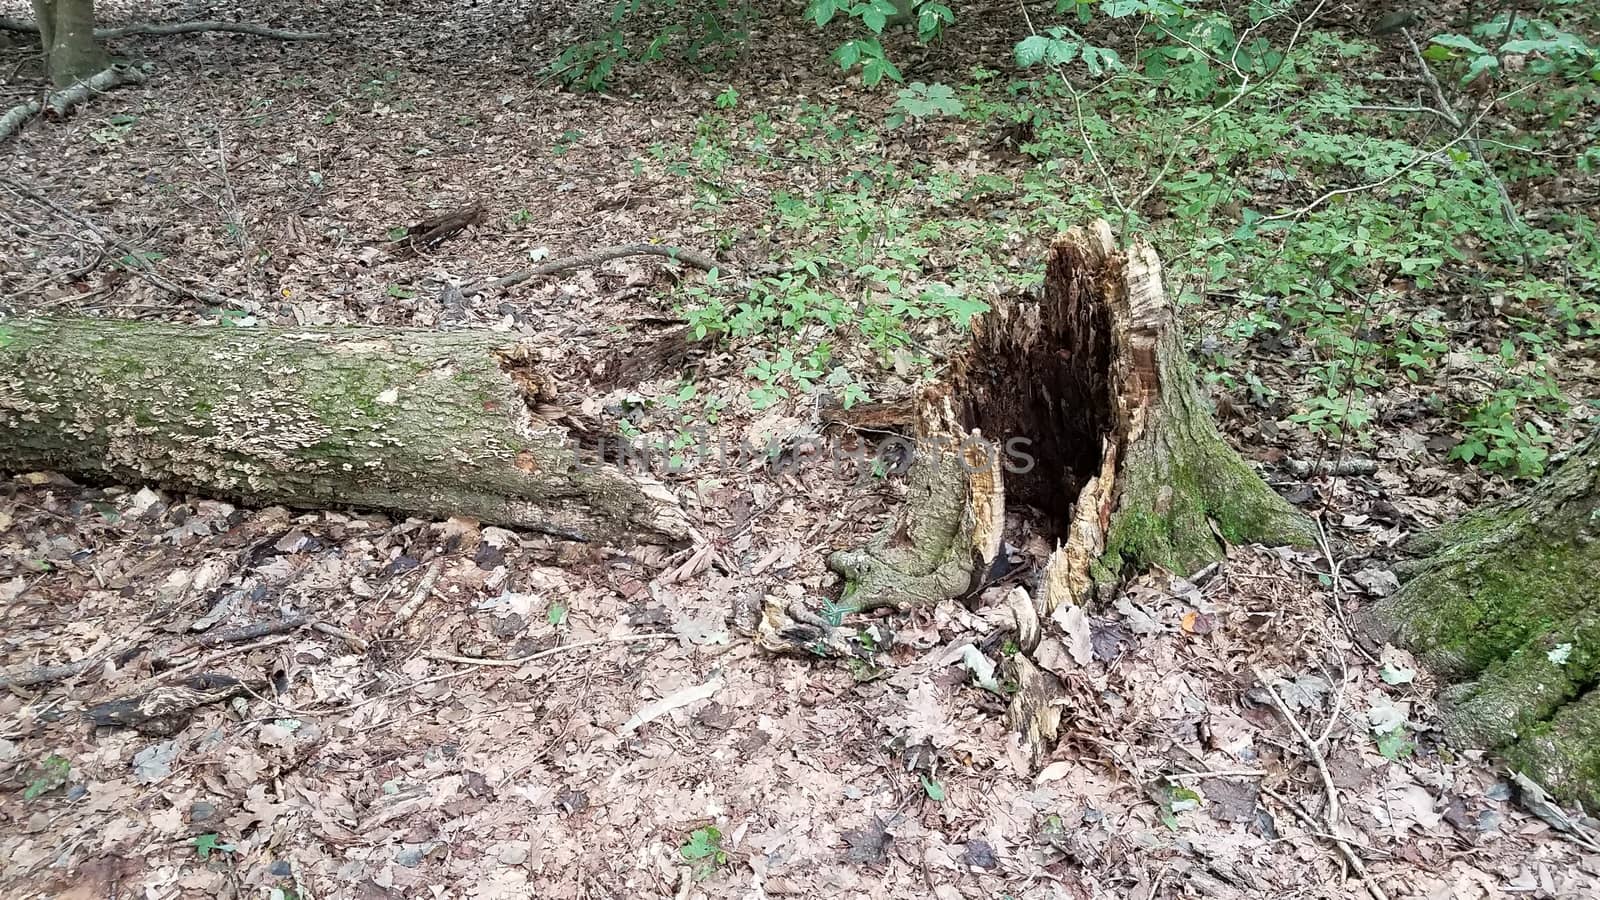 fallen rotten tree with stump in forest or woods with leaves